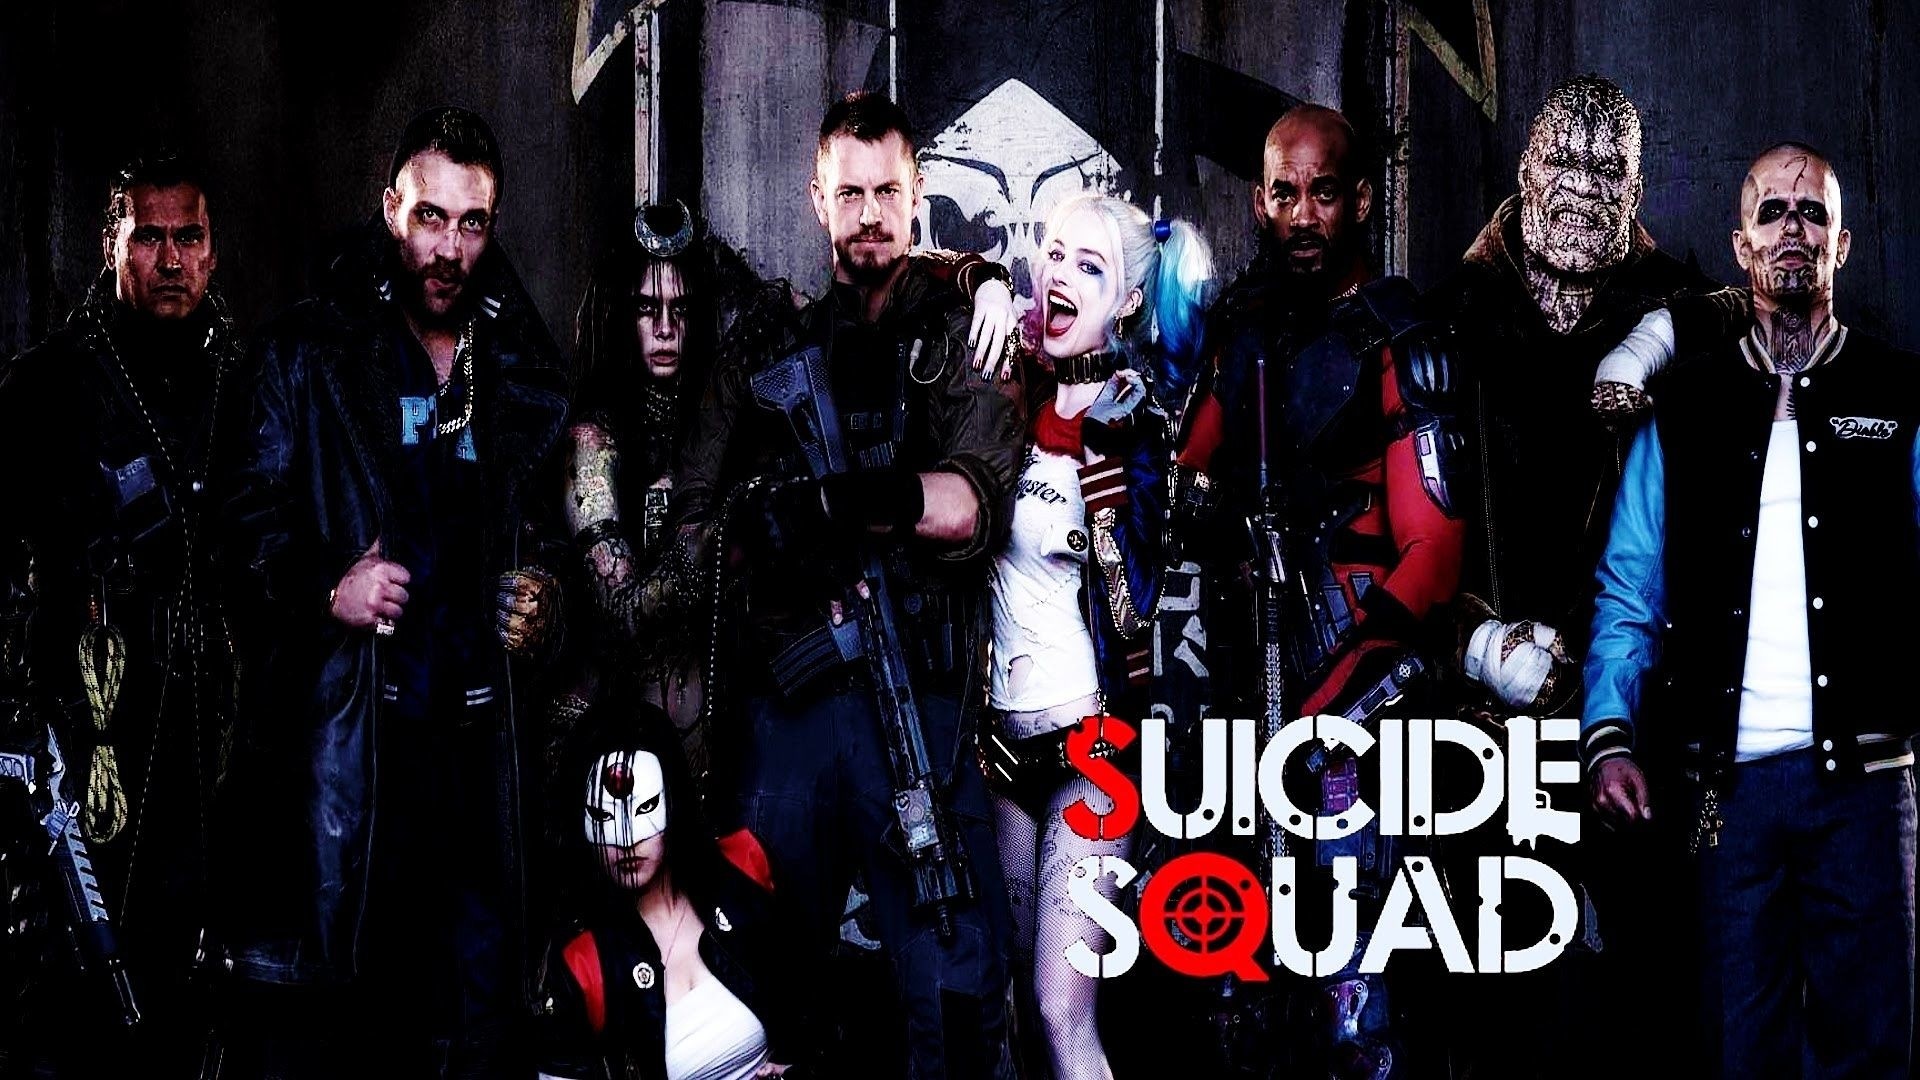 1920x1080 Title : movies suicide squad 2016 movie wallpapers (desktop, phone, tablet.  Dimension : 1920 x 1080. File Type : JPG/JPEG